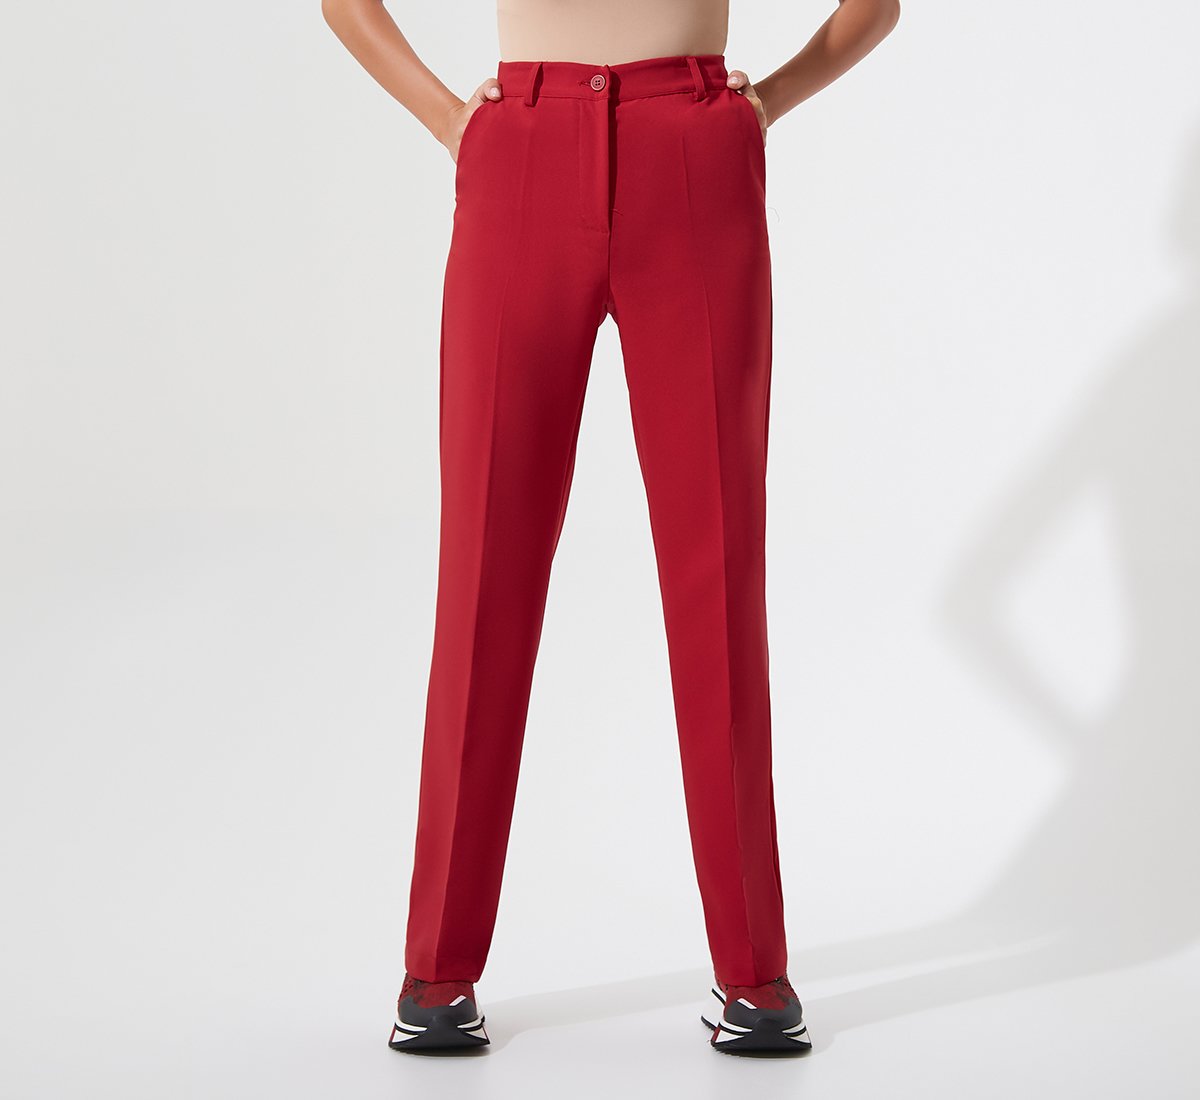 Red high waisted trousers